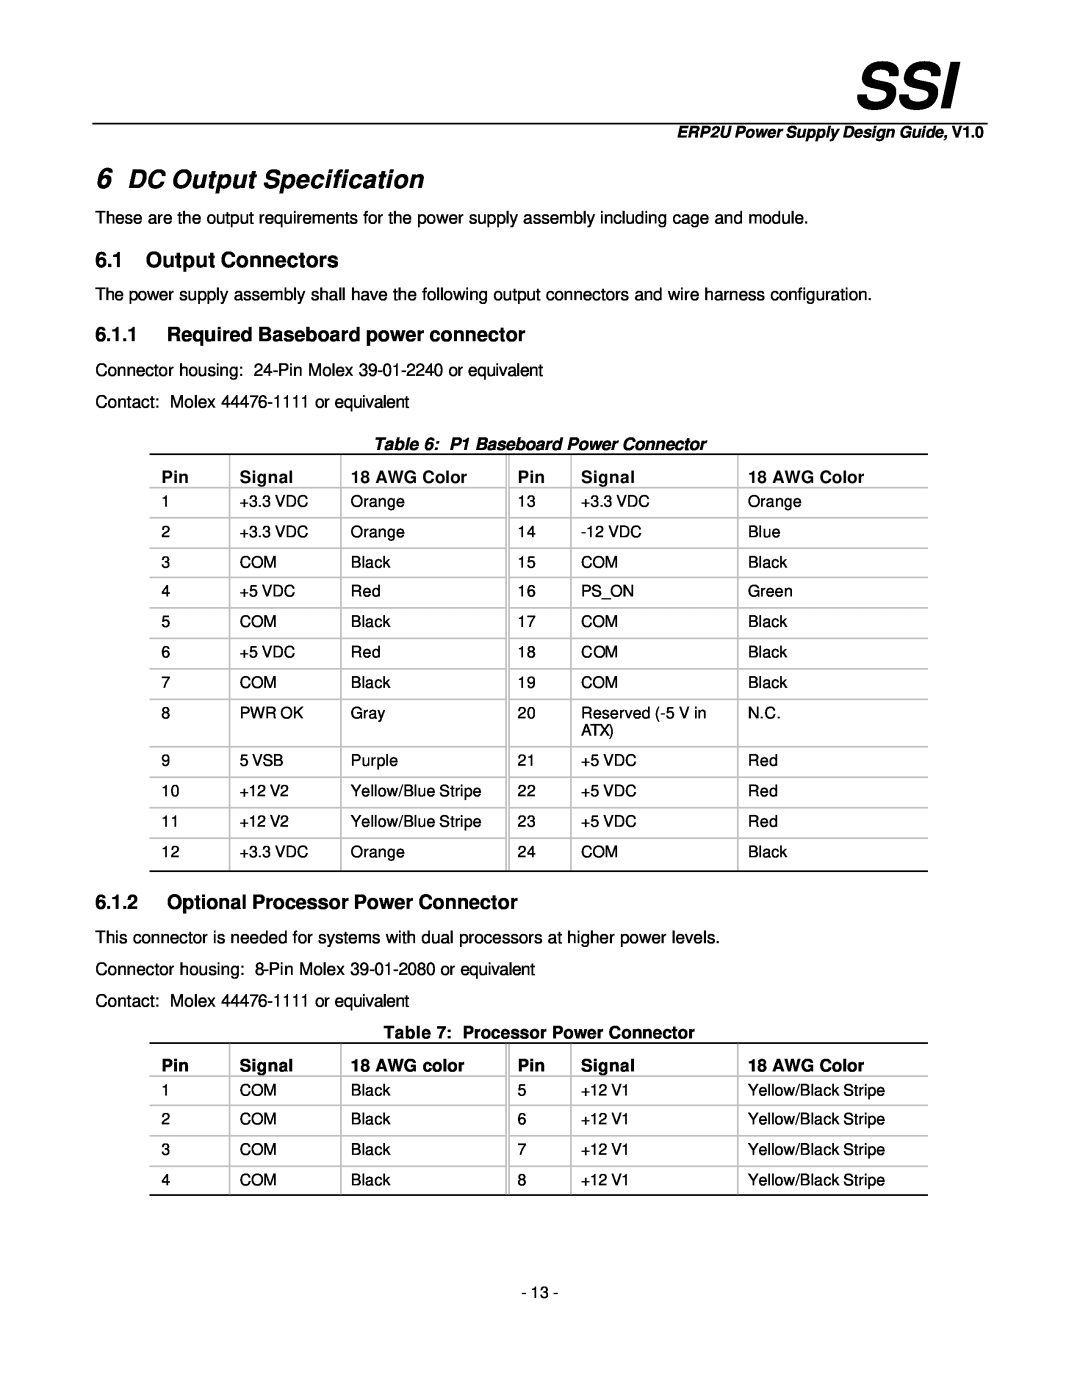 Intel ERP2U manual DC Output Specification, Output Connectors, Required Baseboard power connector 